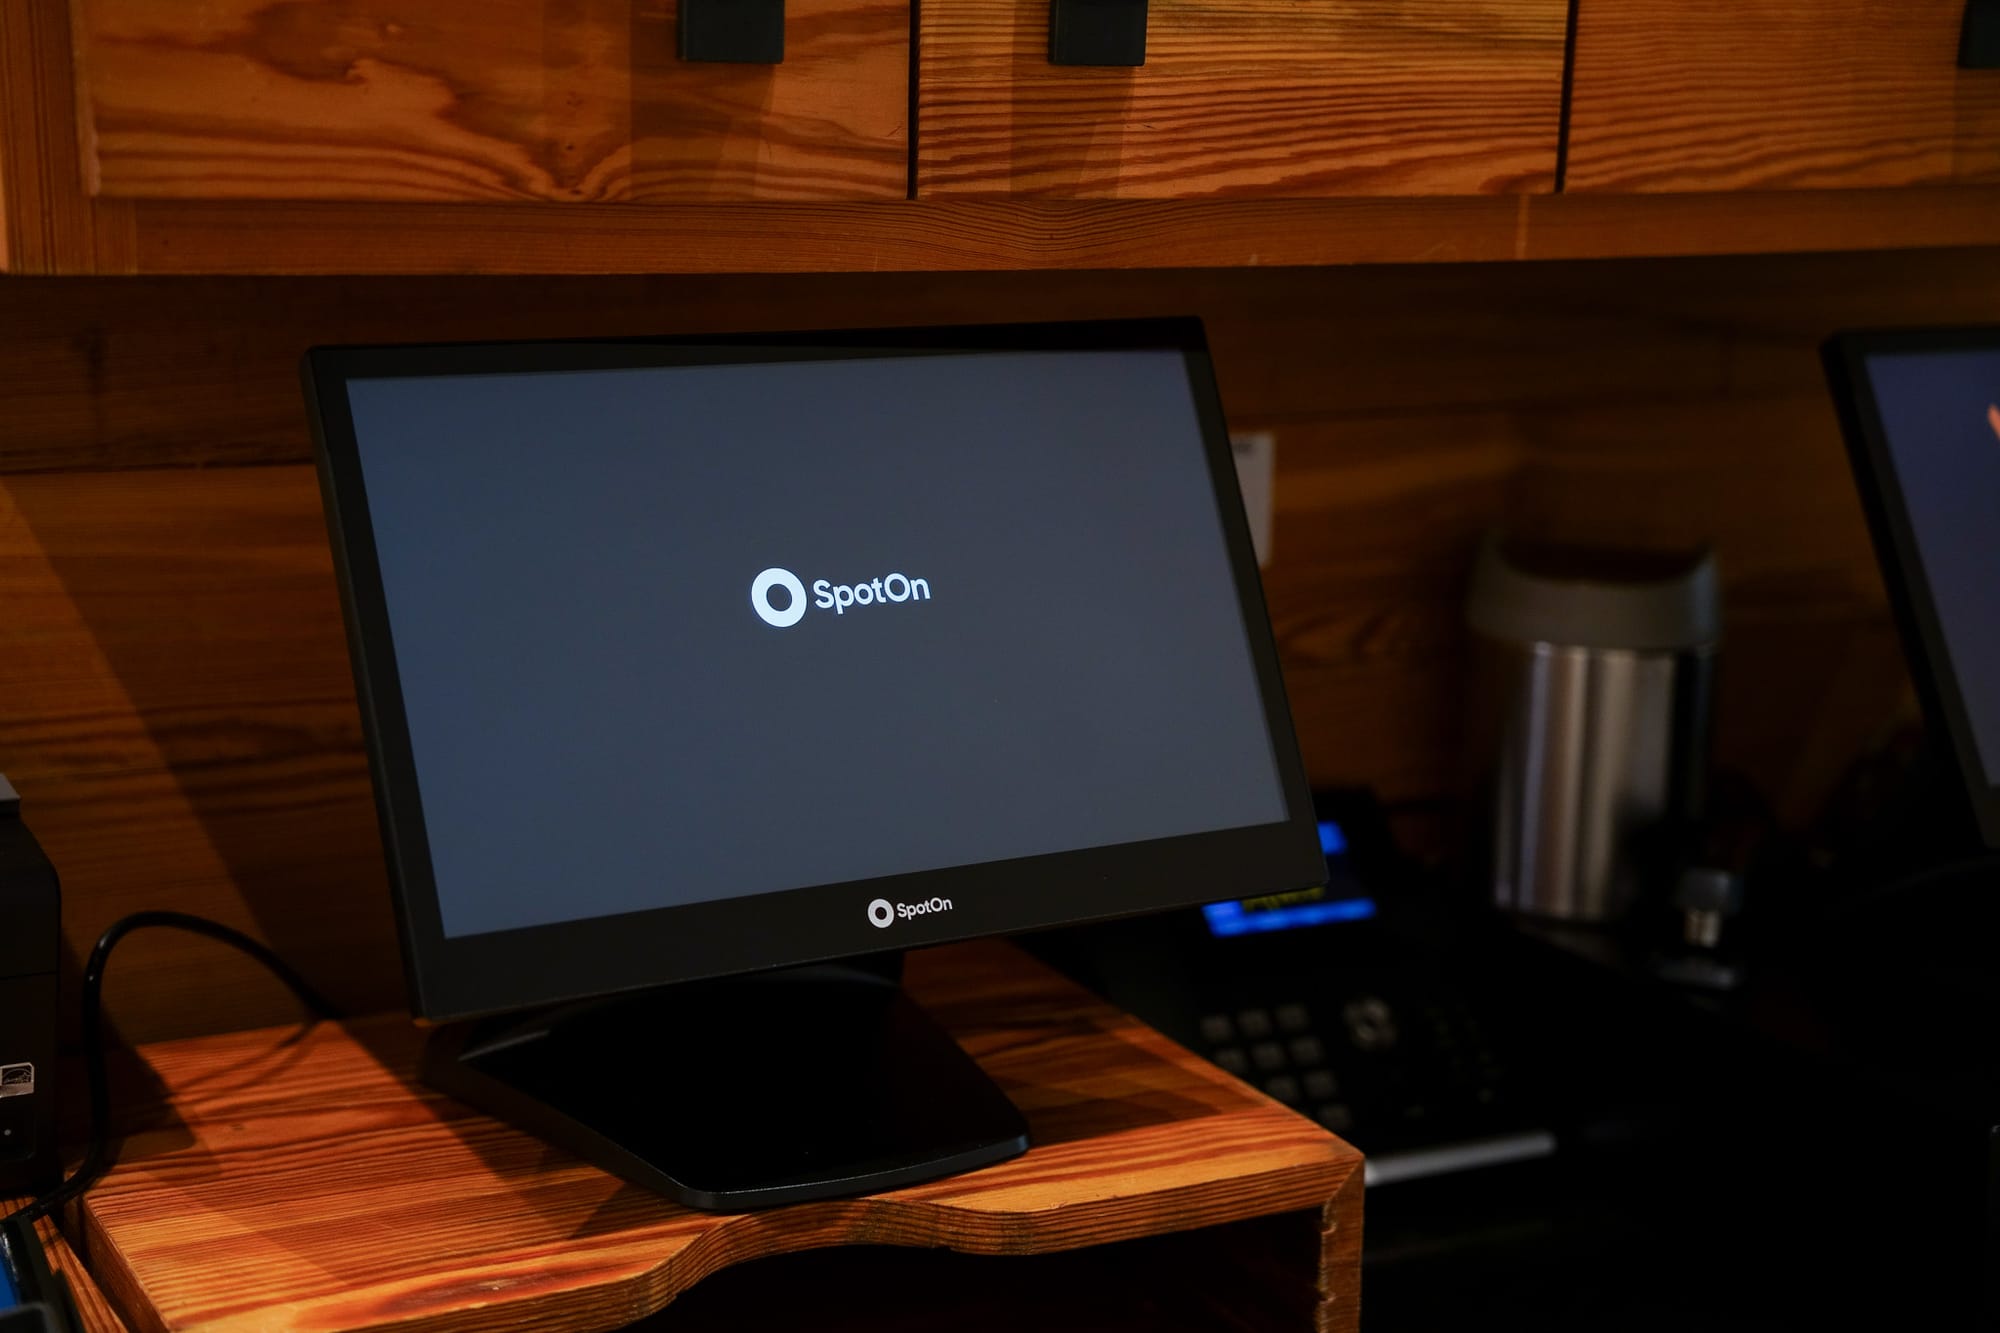 SpotOn POS point of sale system for restaurant retail businesses